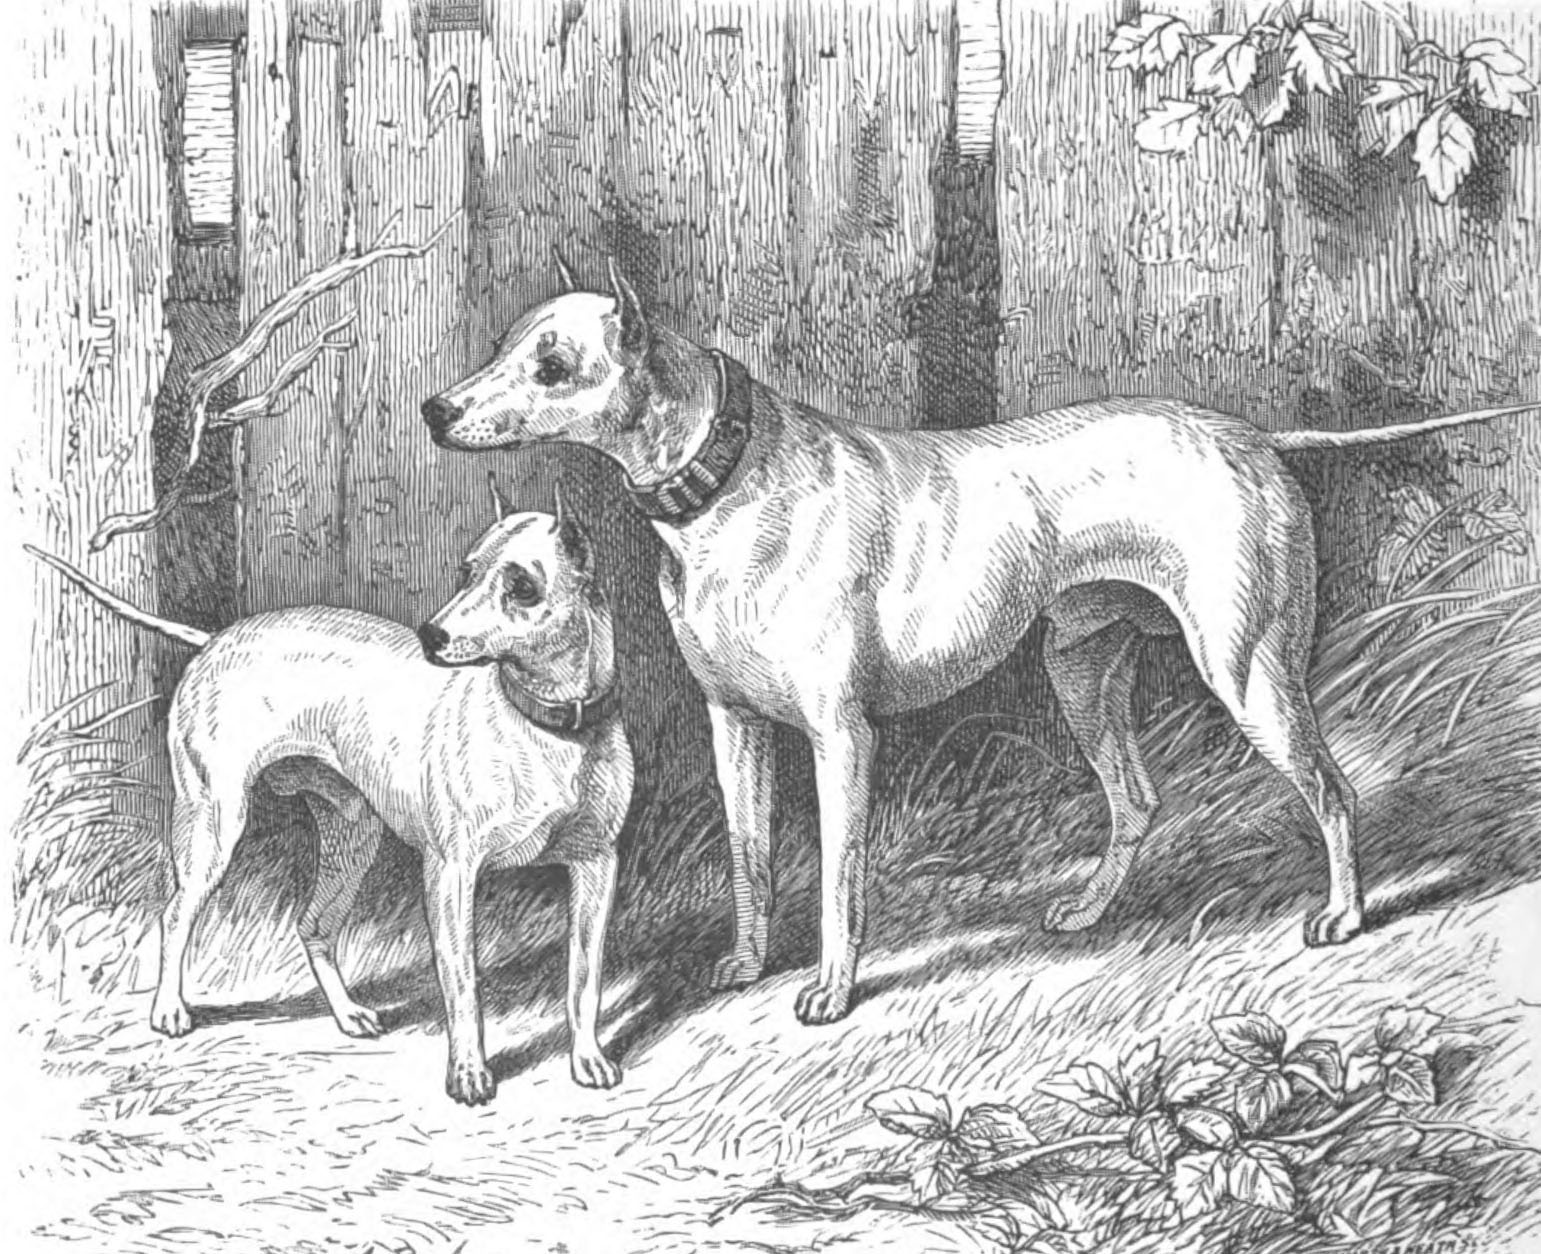 Dog Law Reporter: The Sordid History of Pit Bull Fighting in 19th Century  England